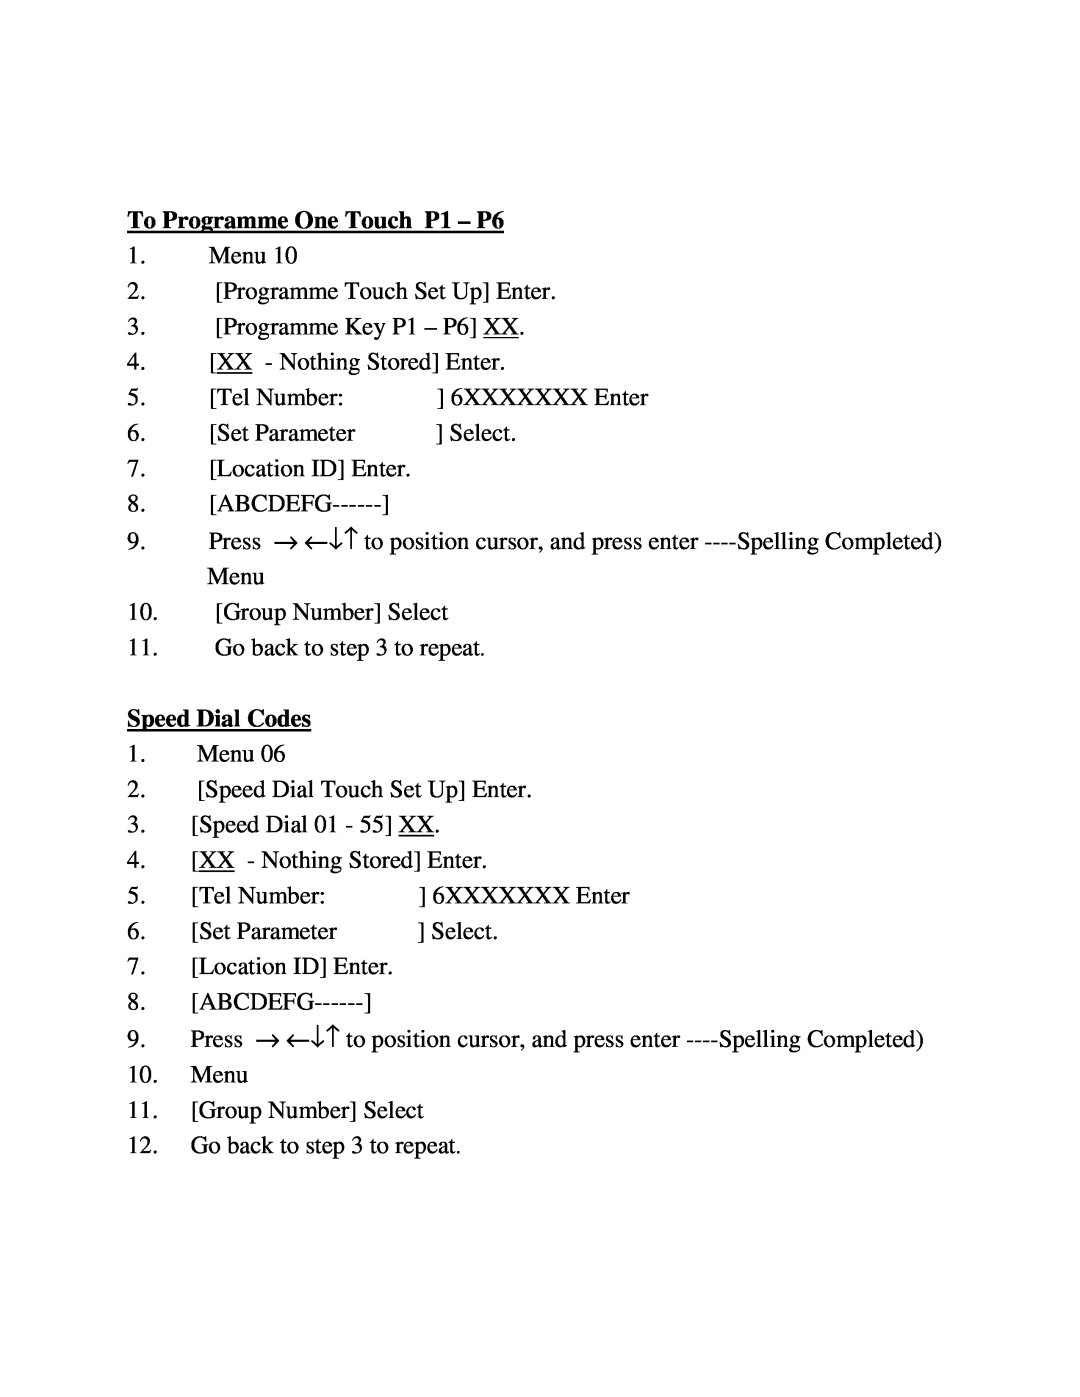 Xerox 7024 manual To Programme One Touch P1 – P6, Speed Dial Codes 